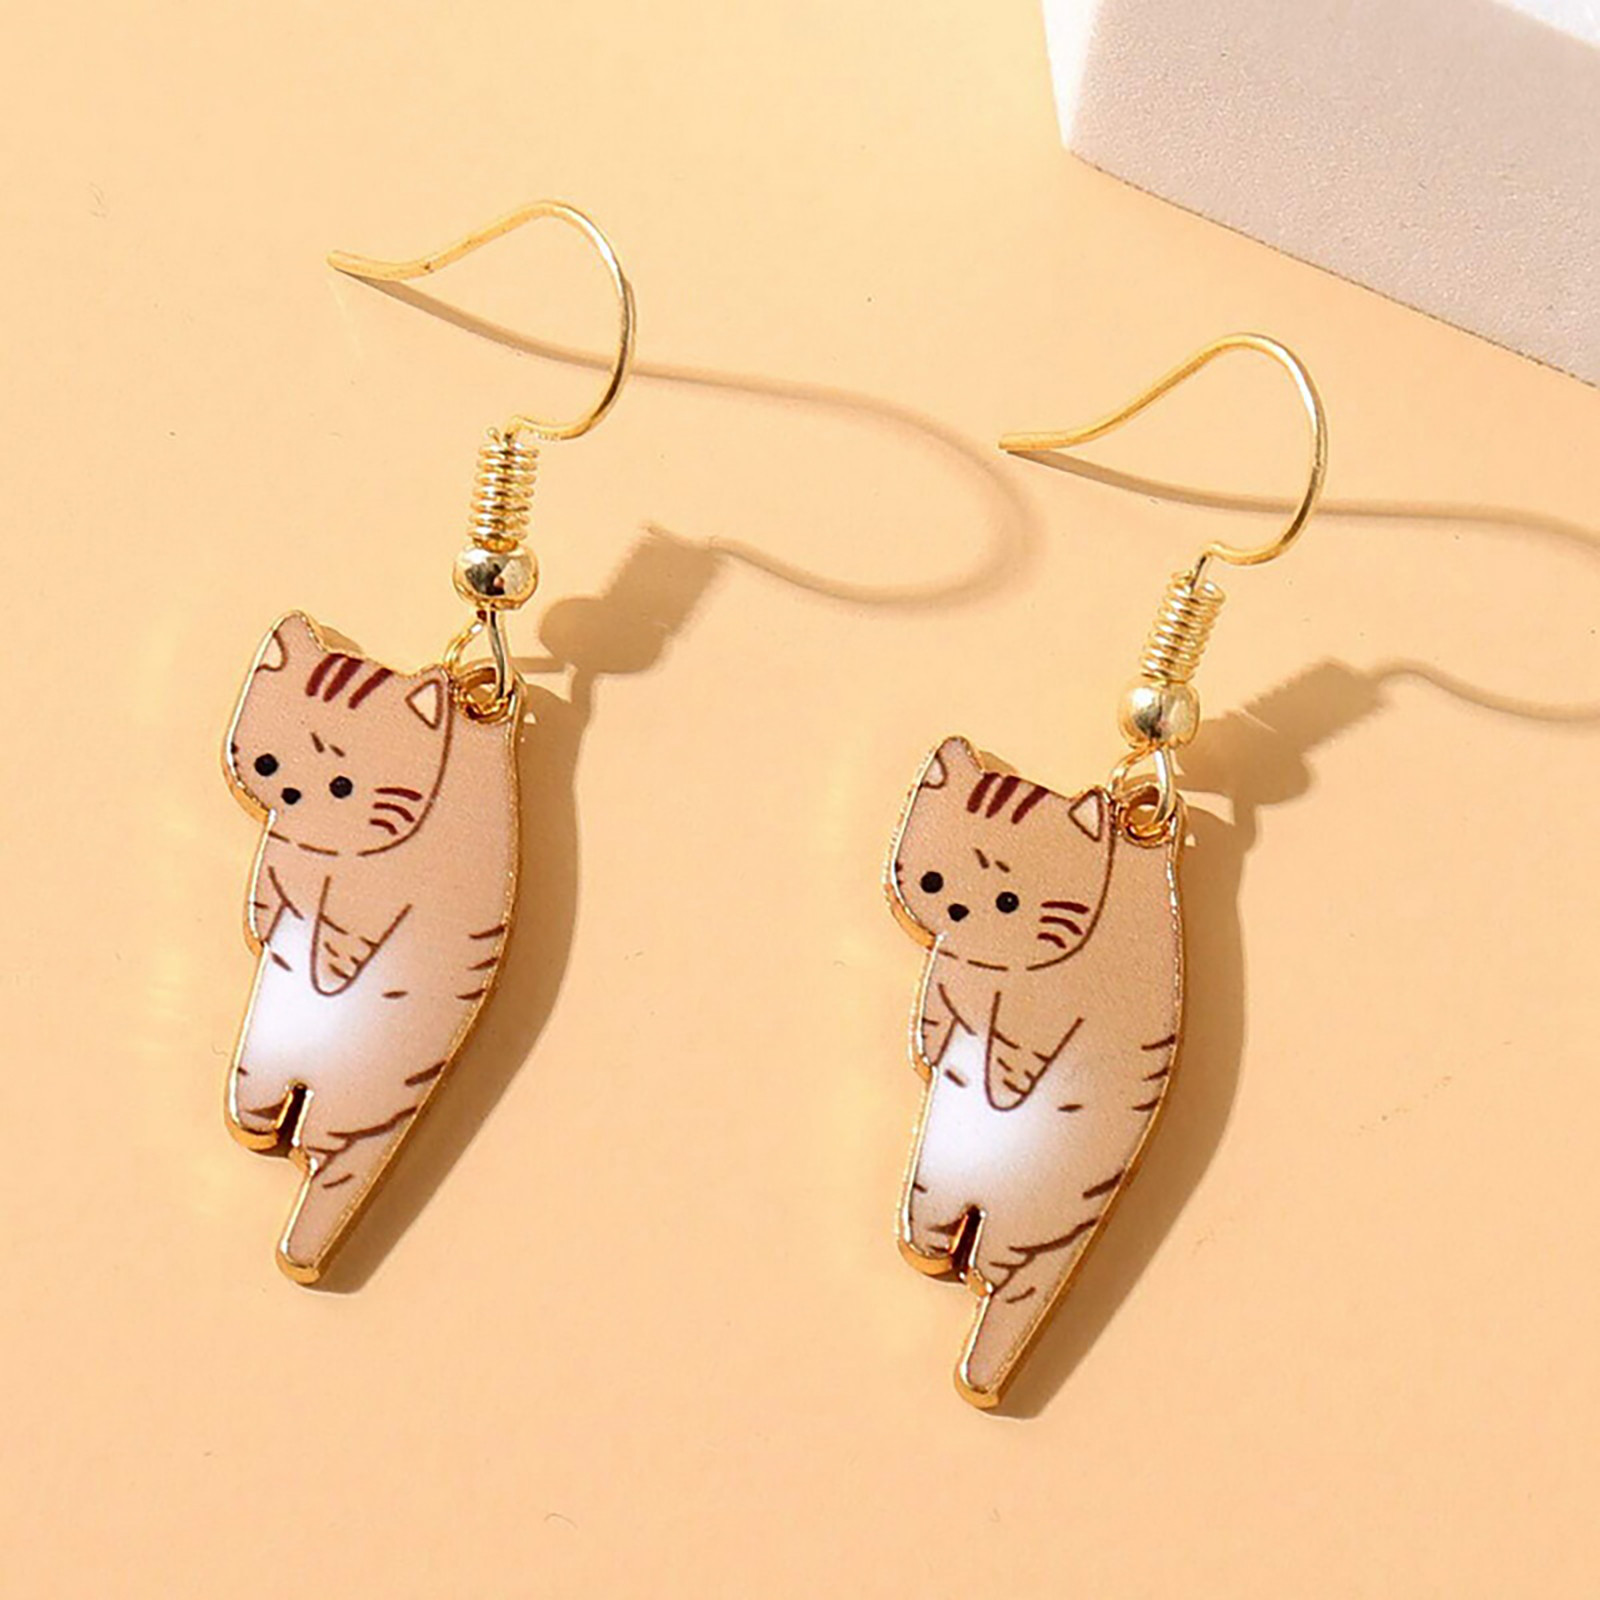 Kayannuo Clearance Cute Cat Dangle Earrings Dangle Cat Earrings Alloy Drop Earrings With Hypoallergenic French Hook Animal - image 1 of 3